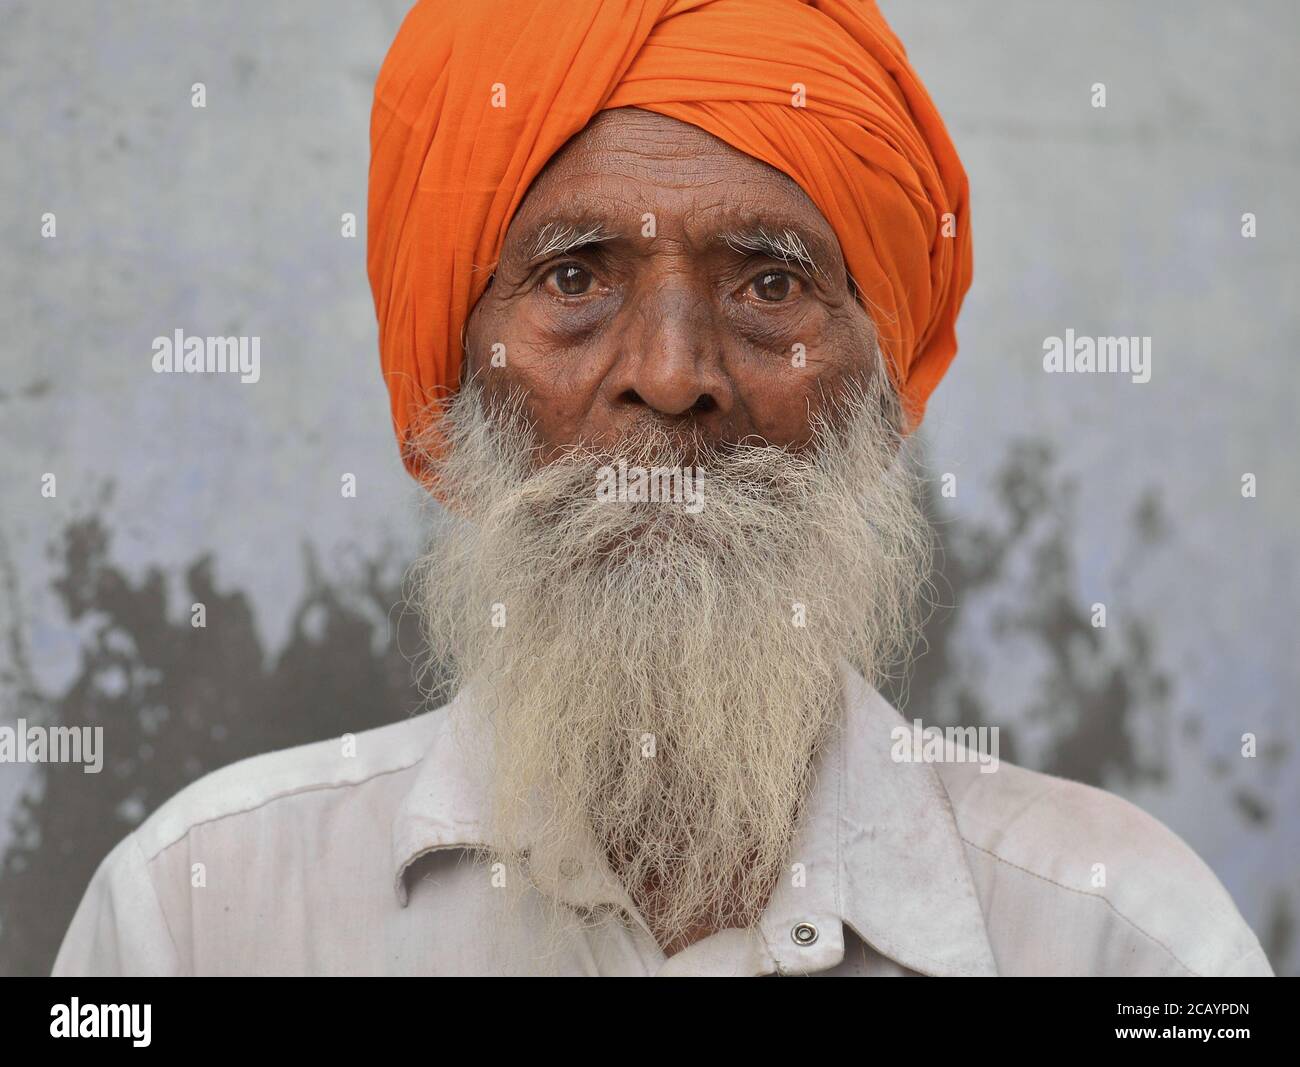 Old Indian Sikh man with orange turban (dastar) and long grey beard poses for a headshot. Stock Photo